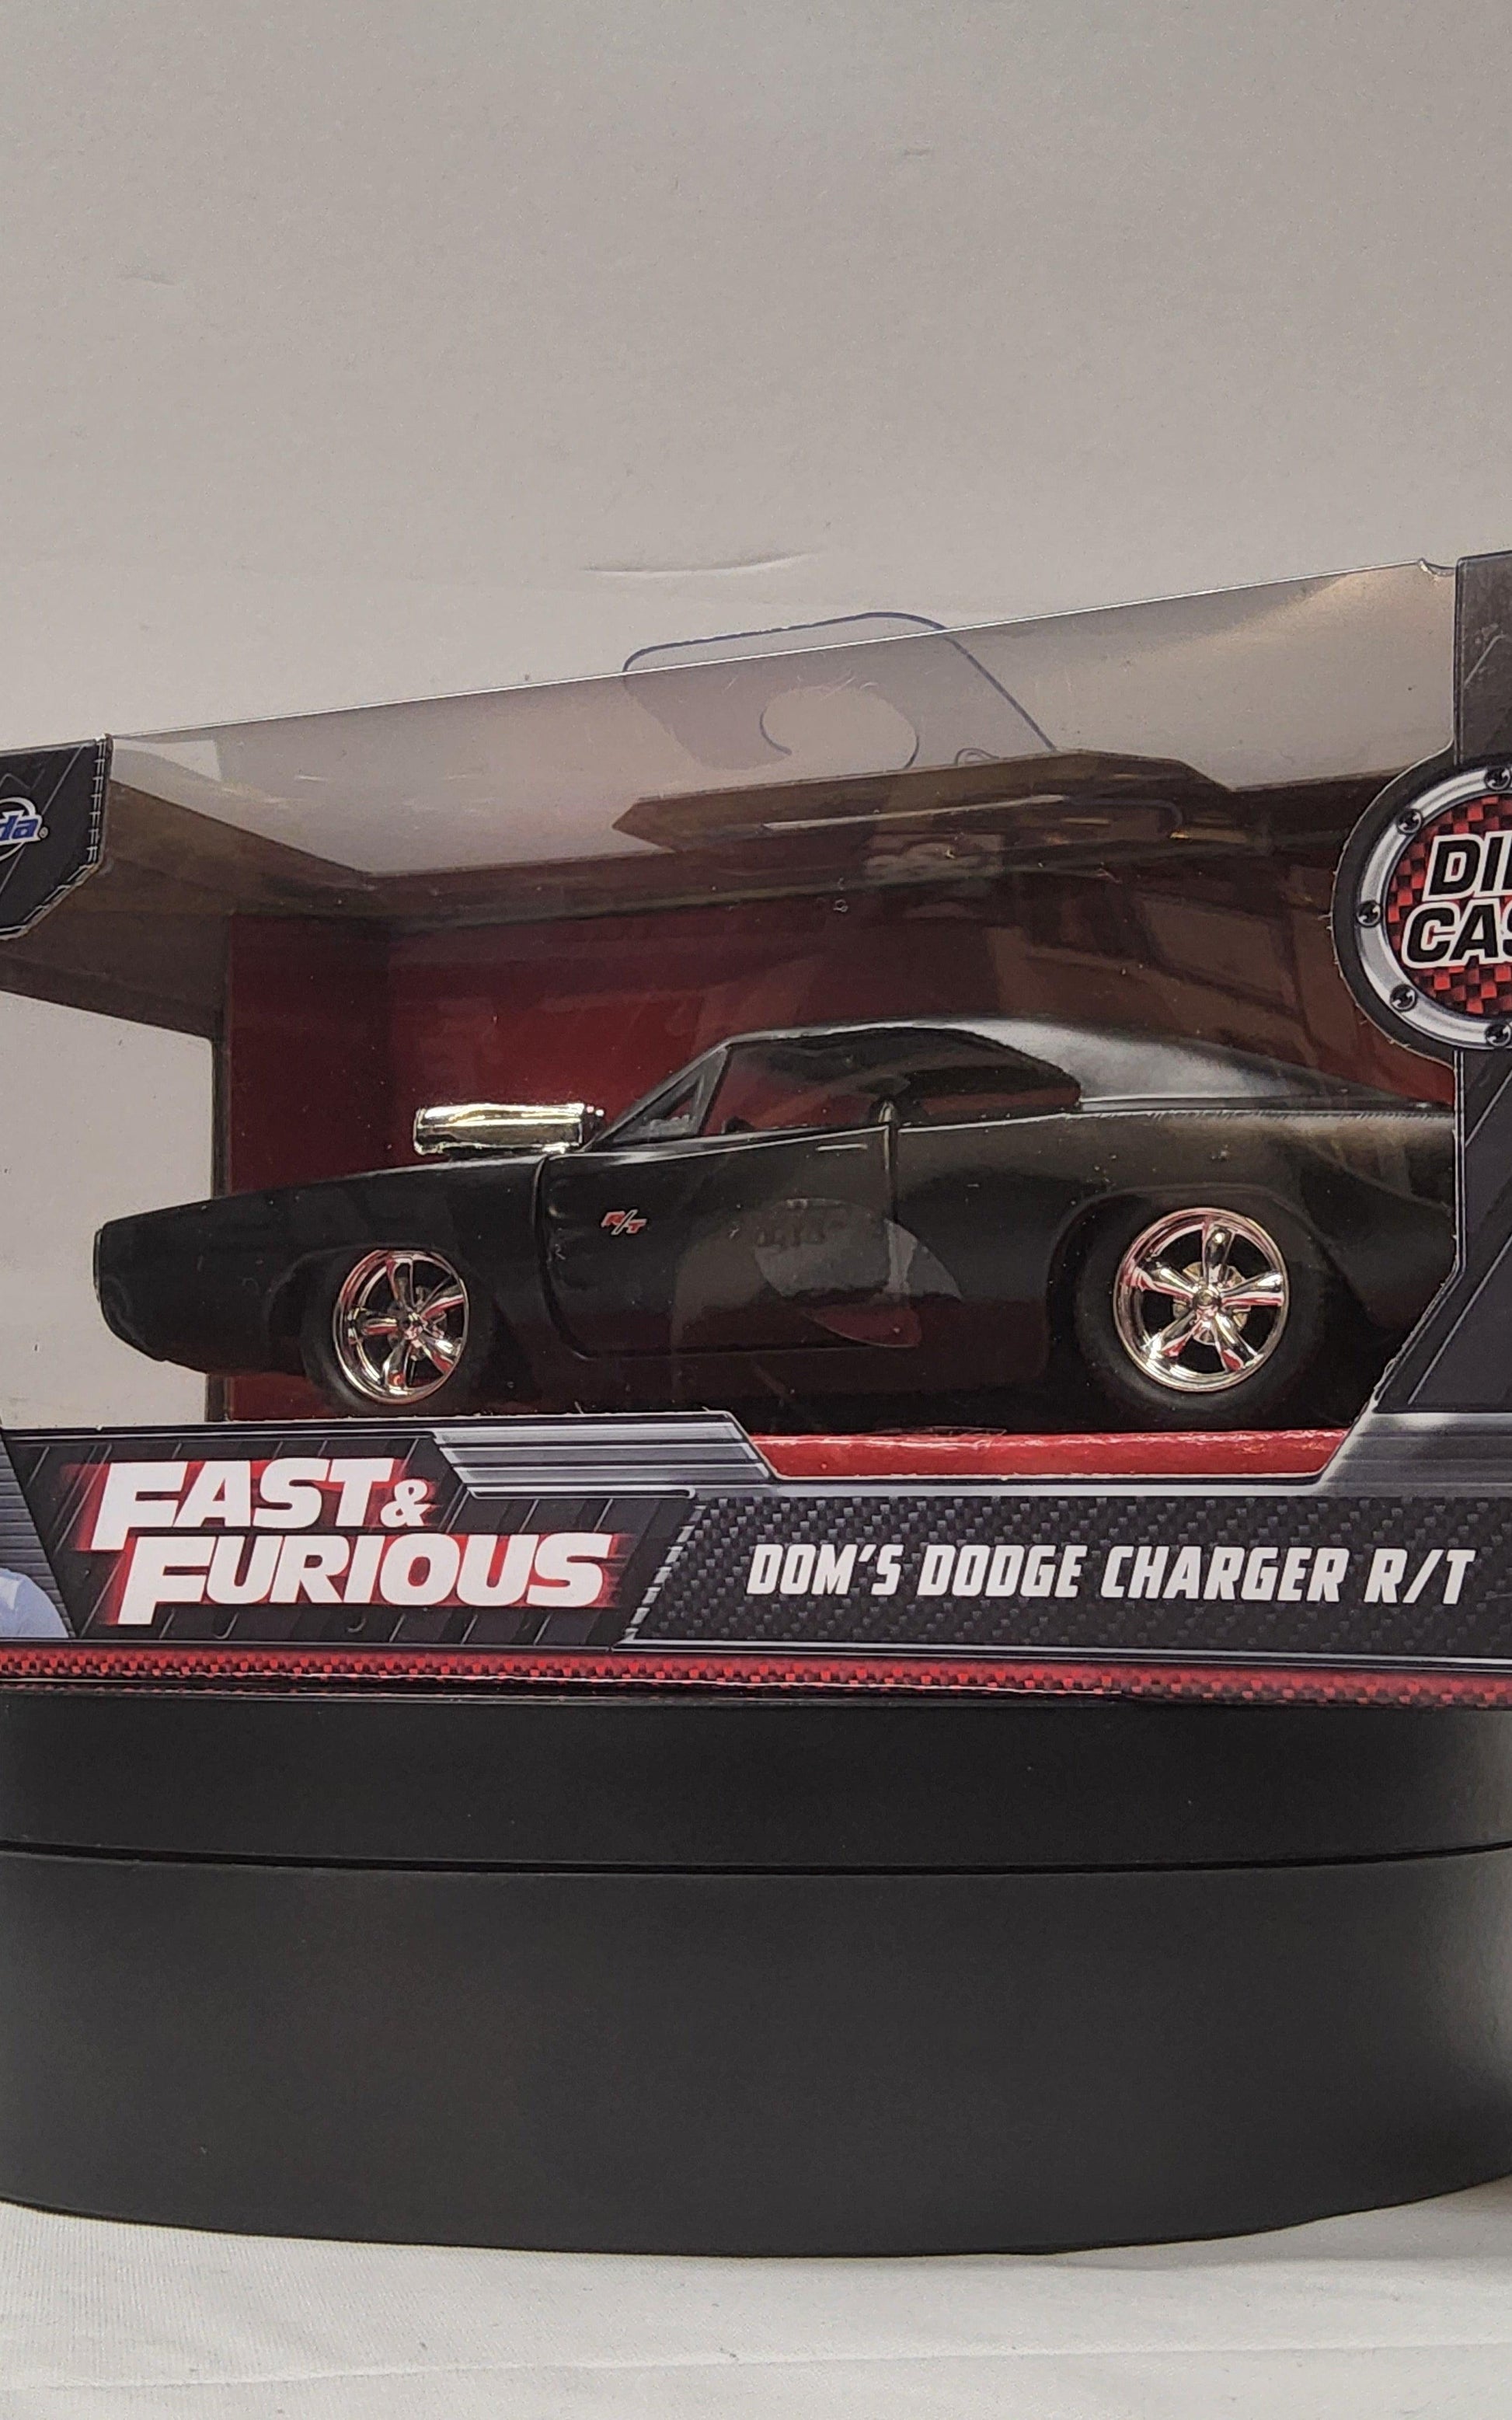 Jada - Fast & Furious - Dom’s 5-inch Dodge Charger R/T Toy Car - Logan's Toy Chest